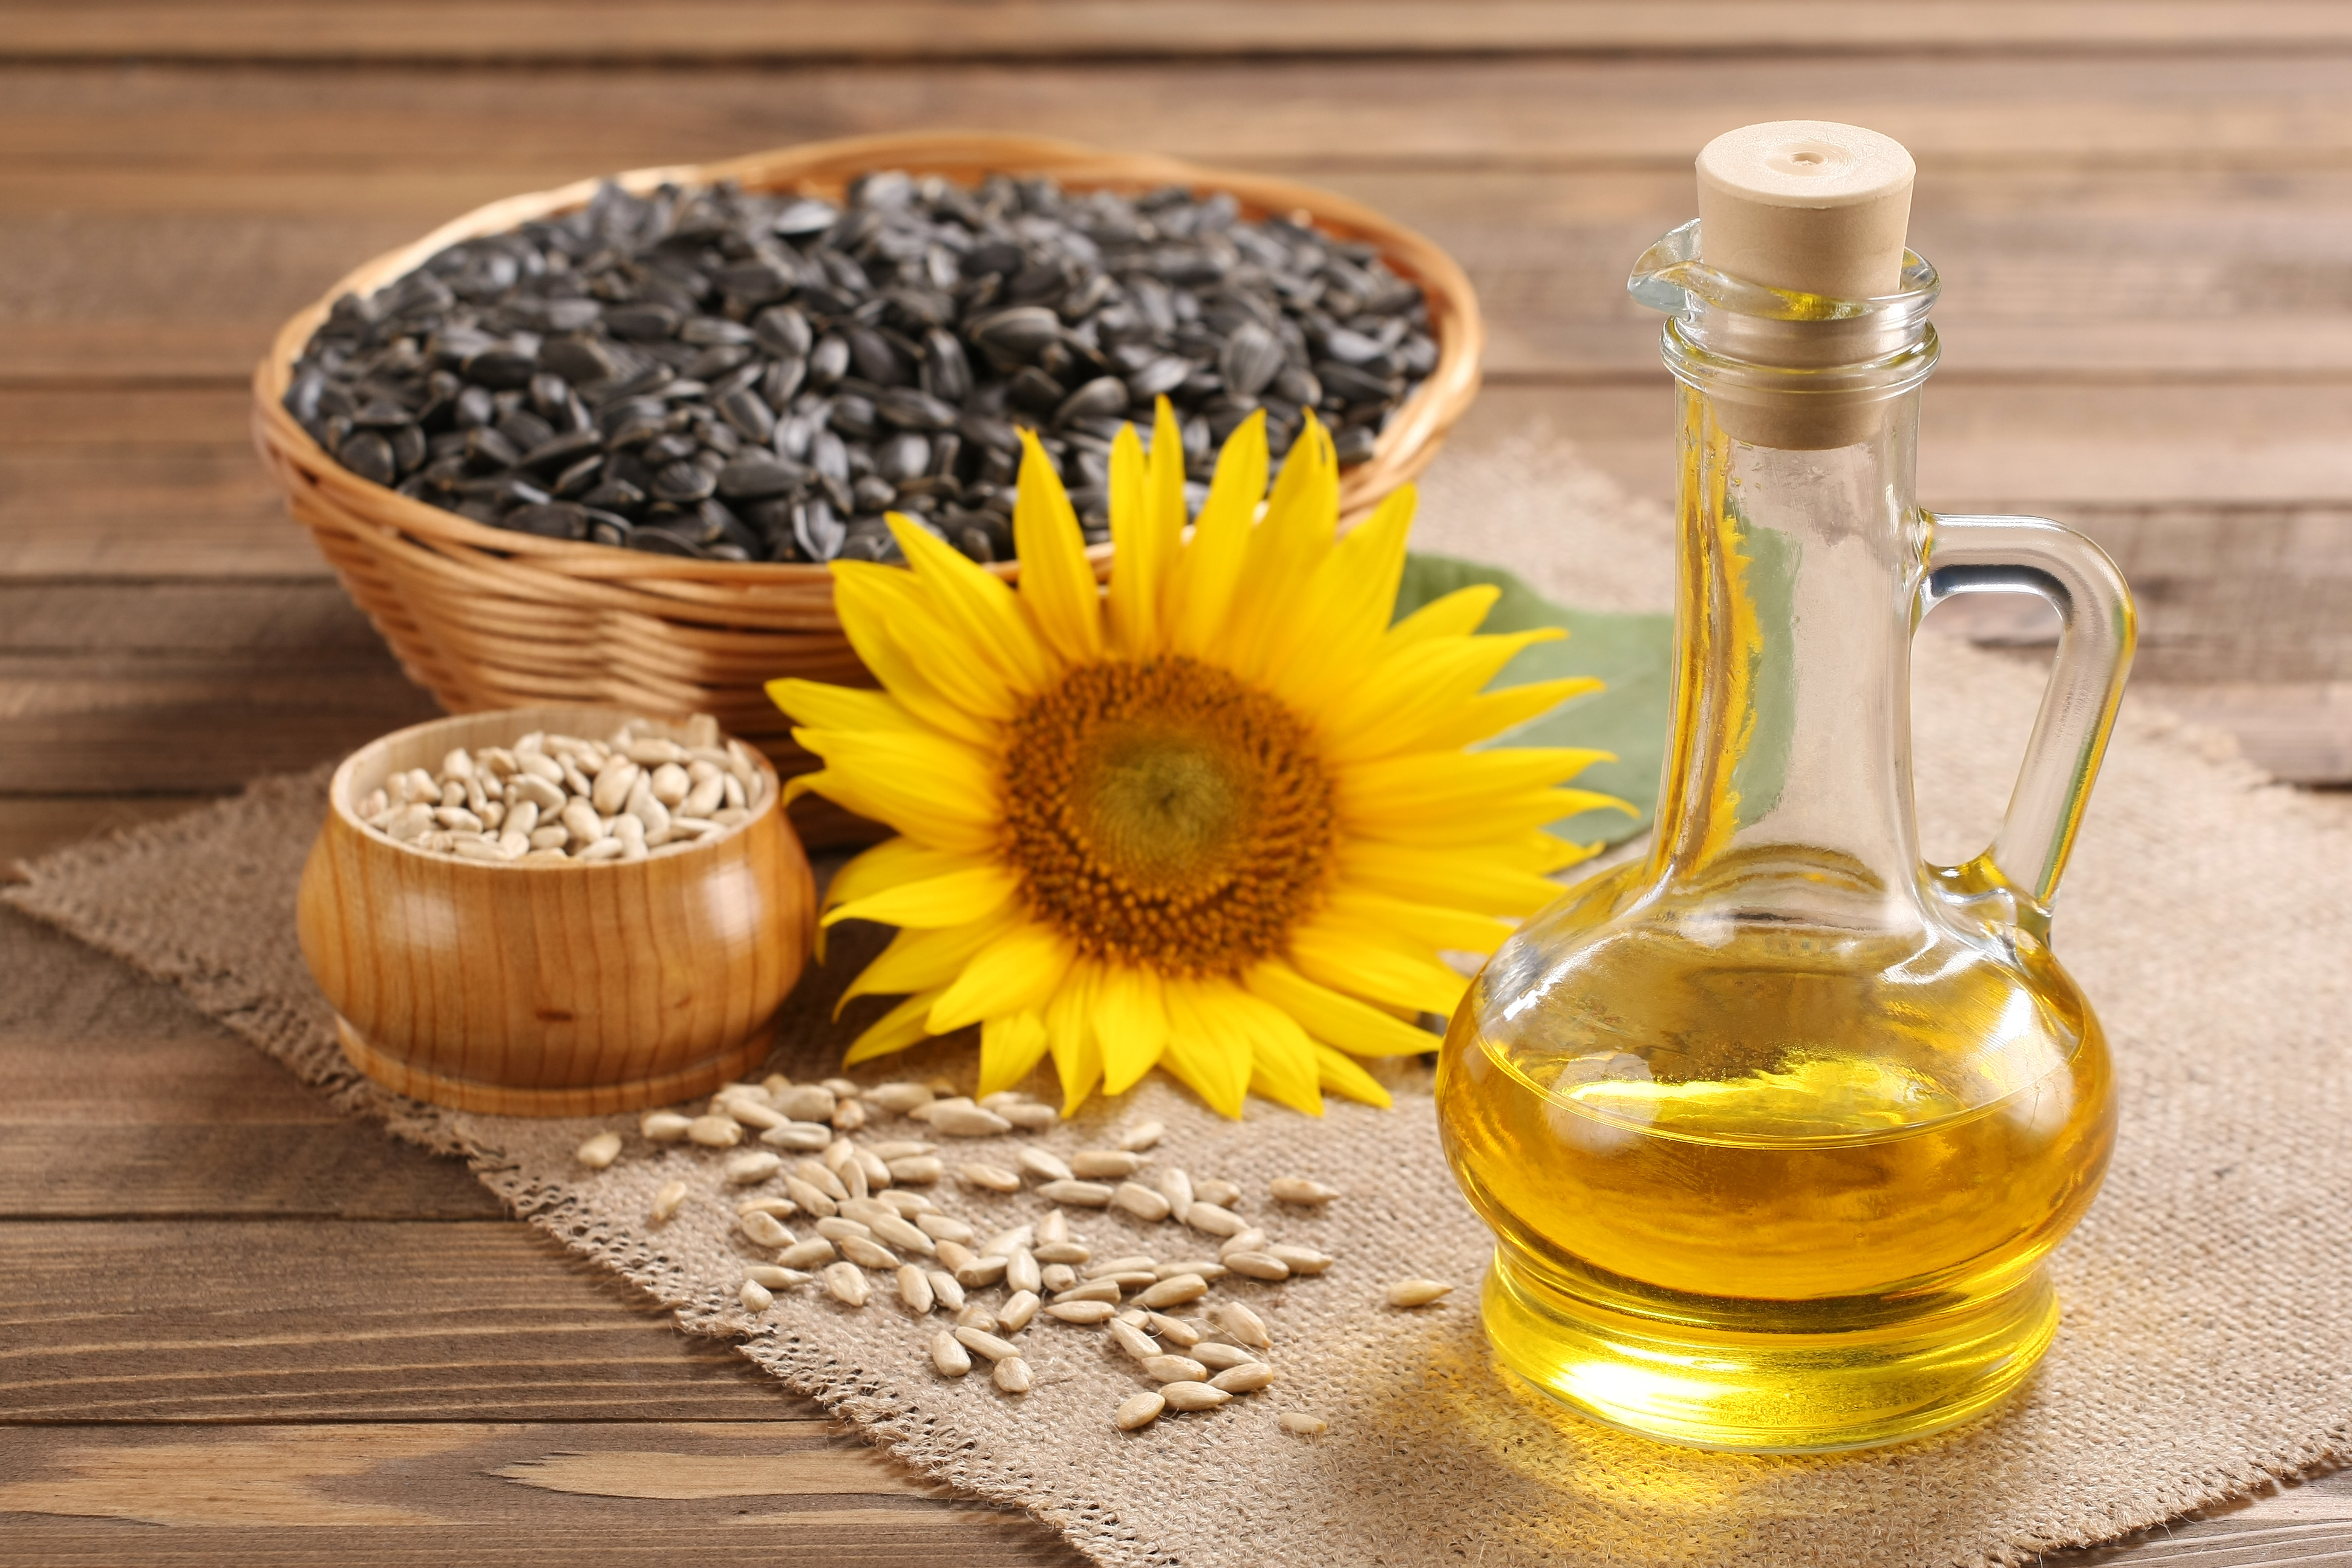 Is Sunflower Oil Good For You?